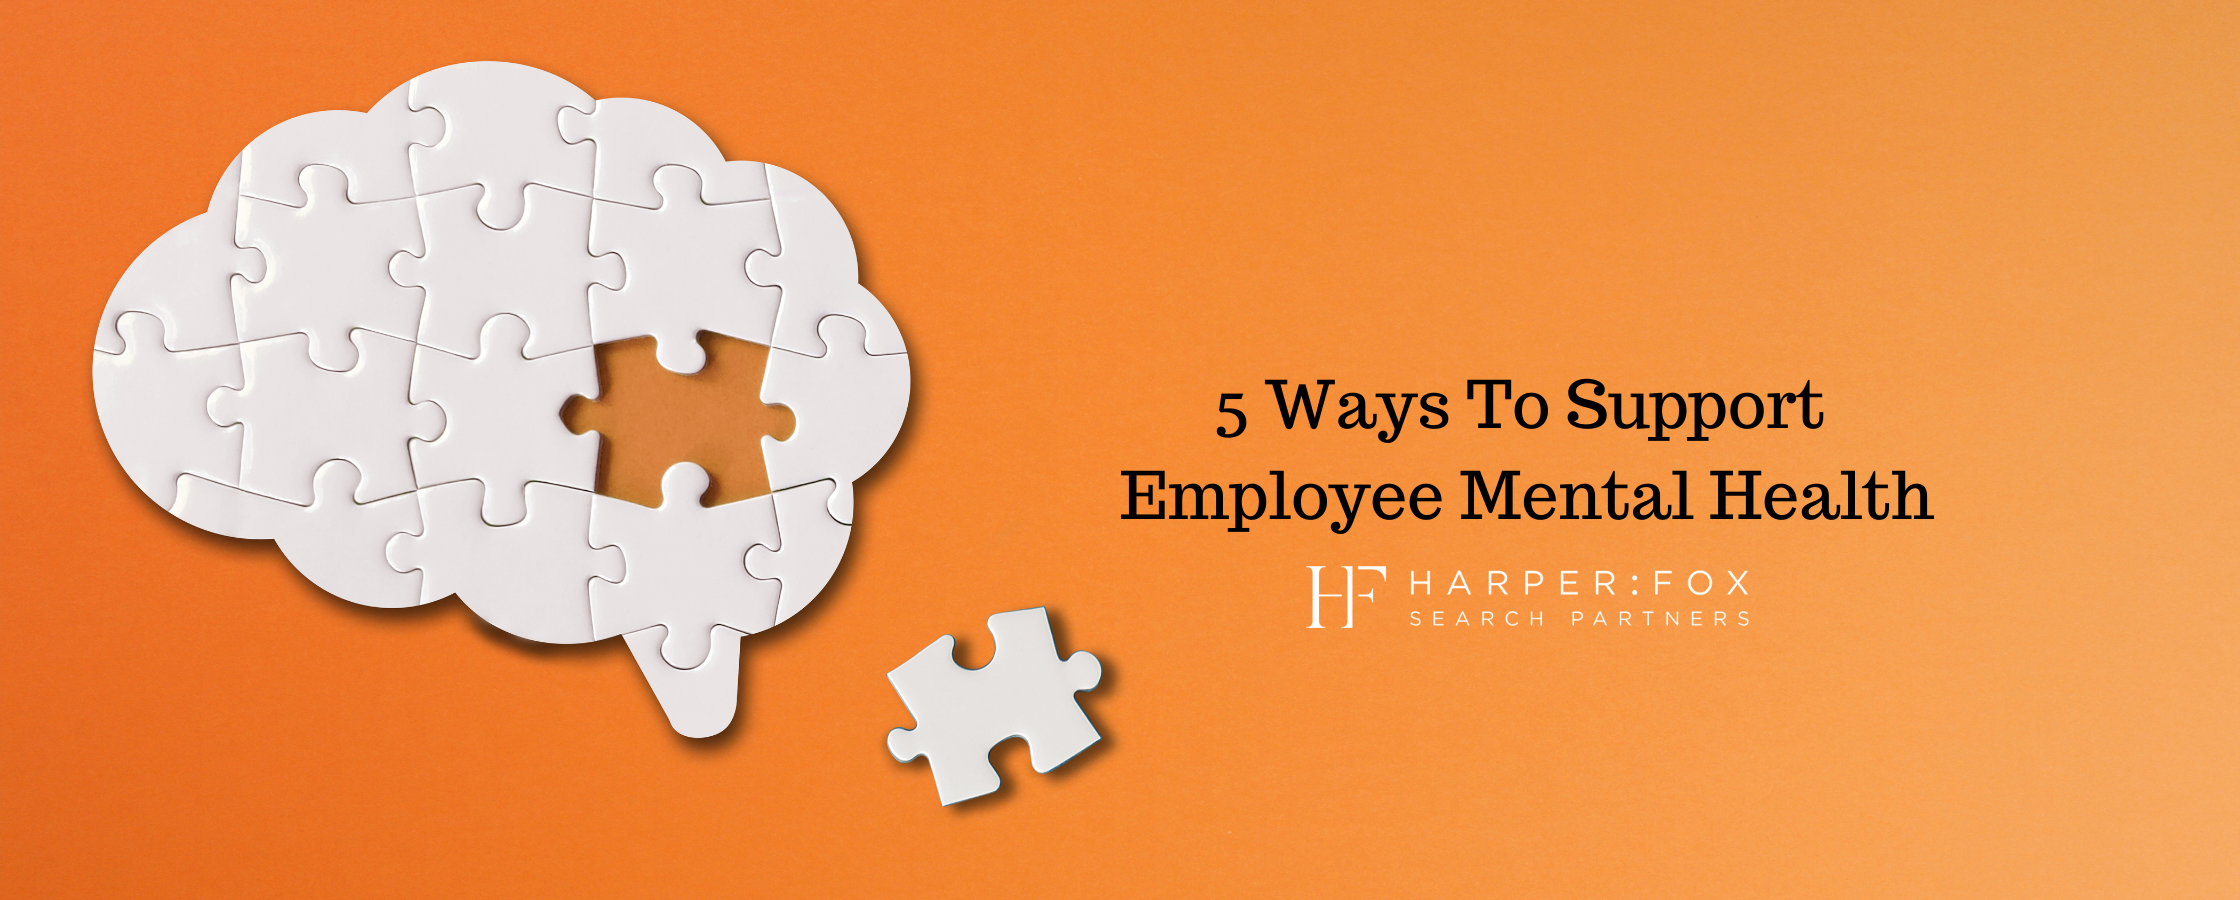 5 Ways To Support Employee Mental Health